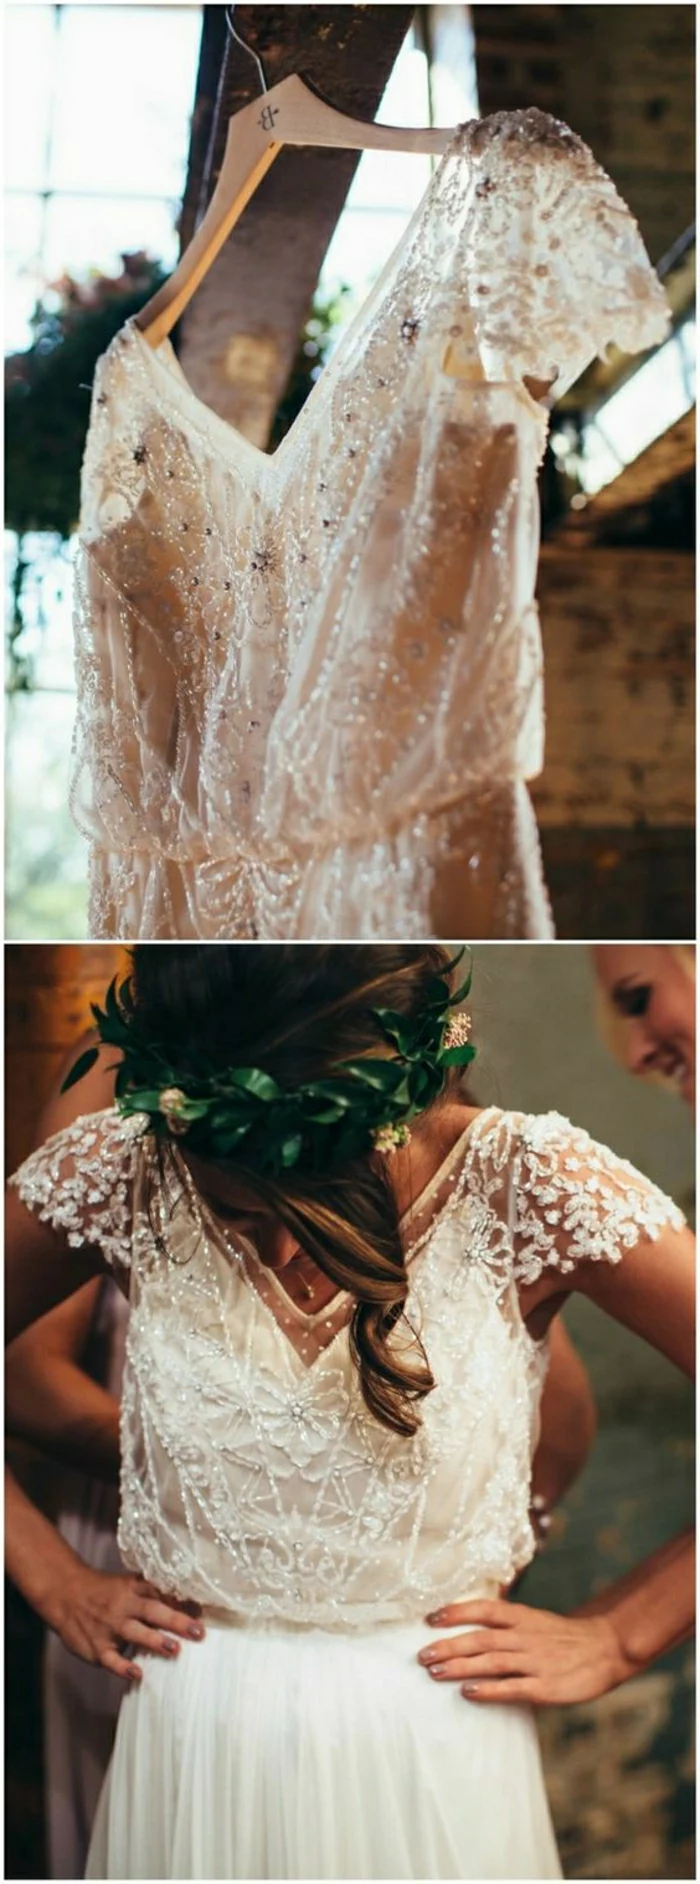 unique wedding dresses, two images of a white wedding dress, one on a hanger with a close up on its beaded and embroidered details, one on a brunette woman looking down with hands on hips